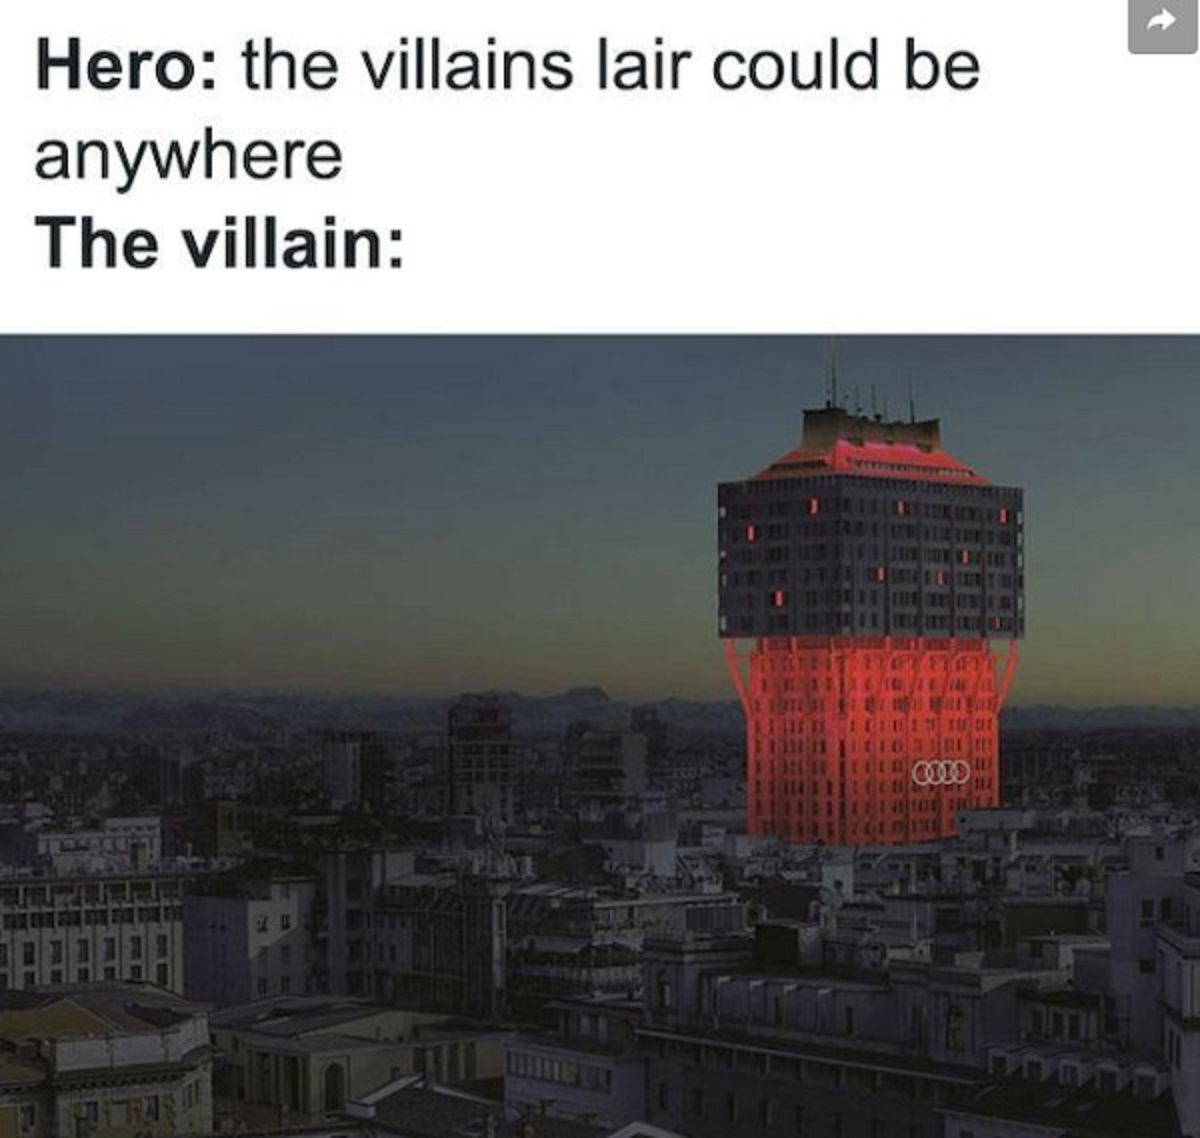 commercial building - Hero the villains lair could be anywhere The villain 10019